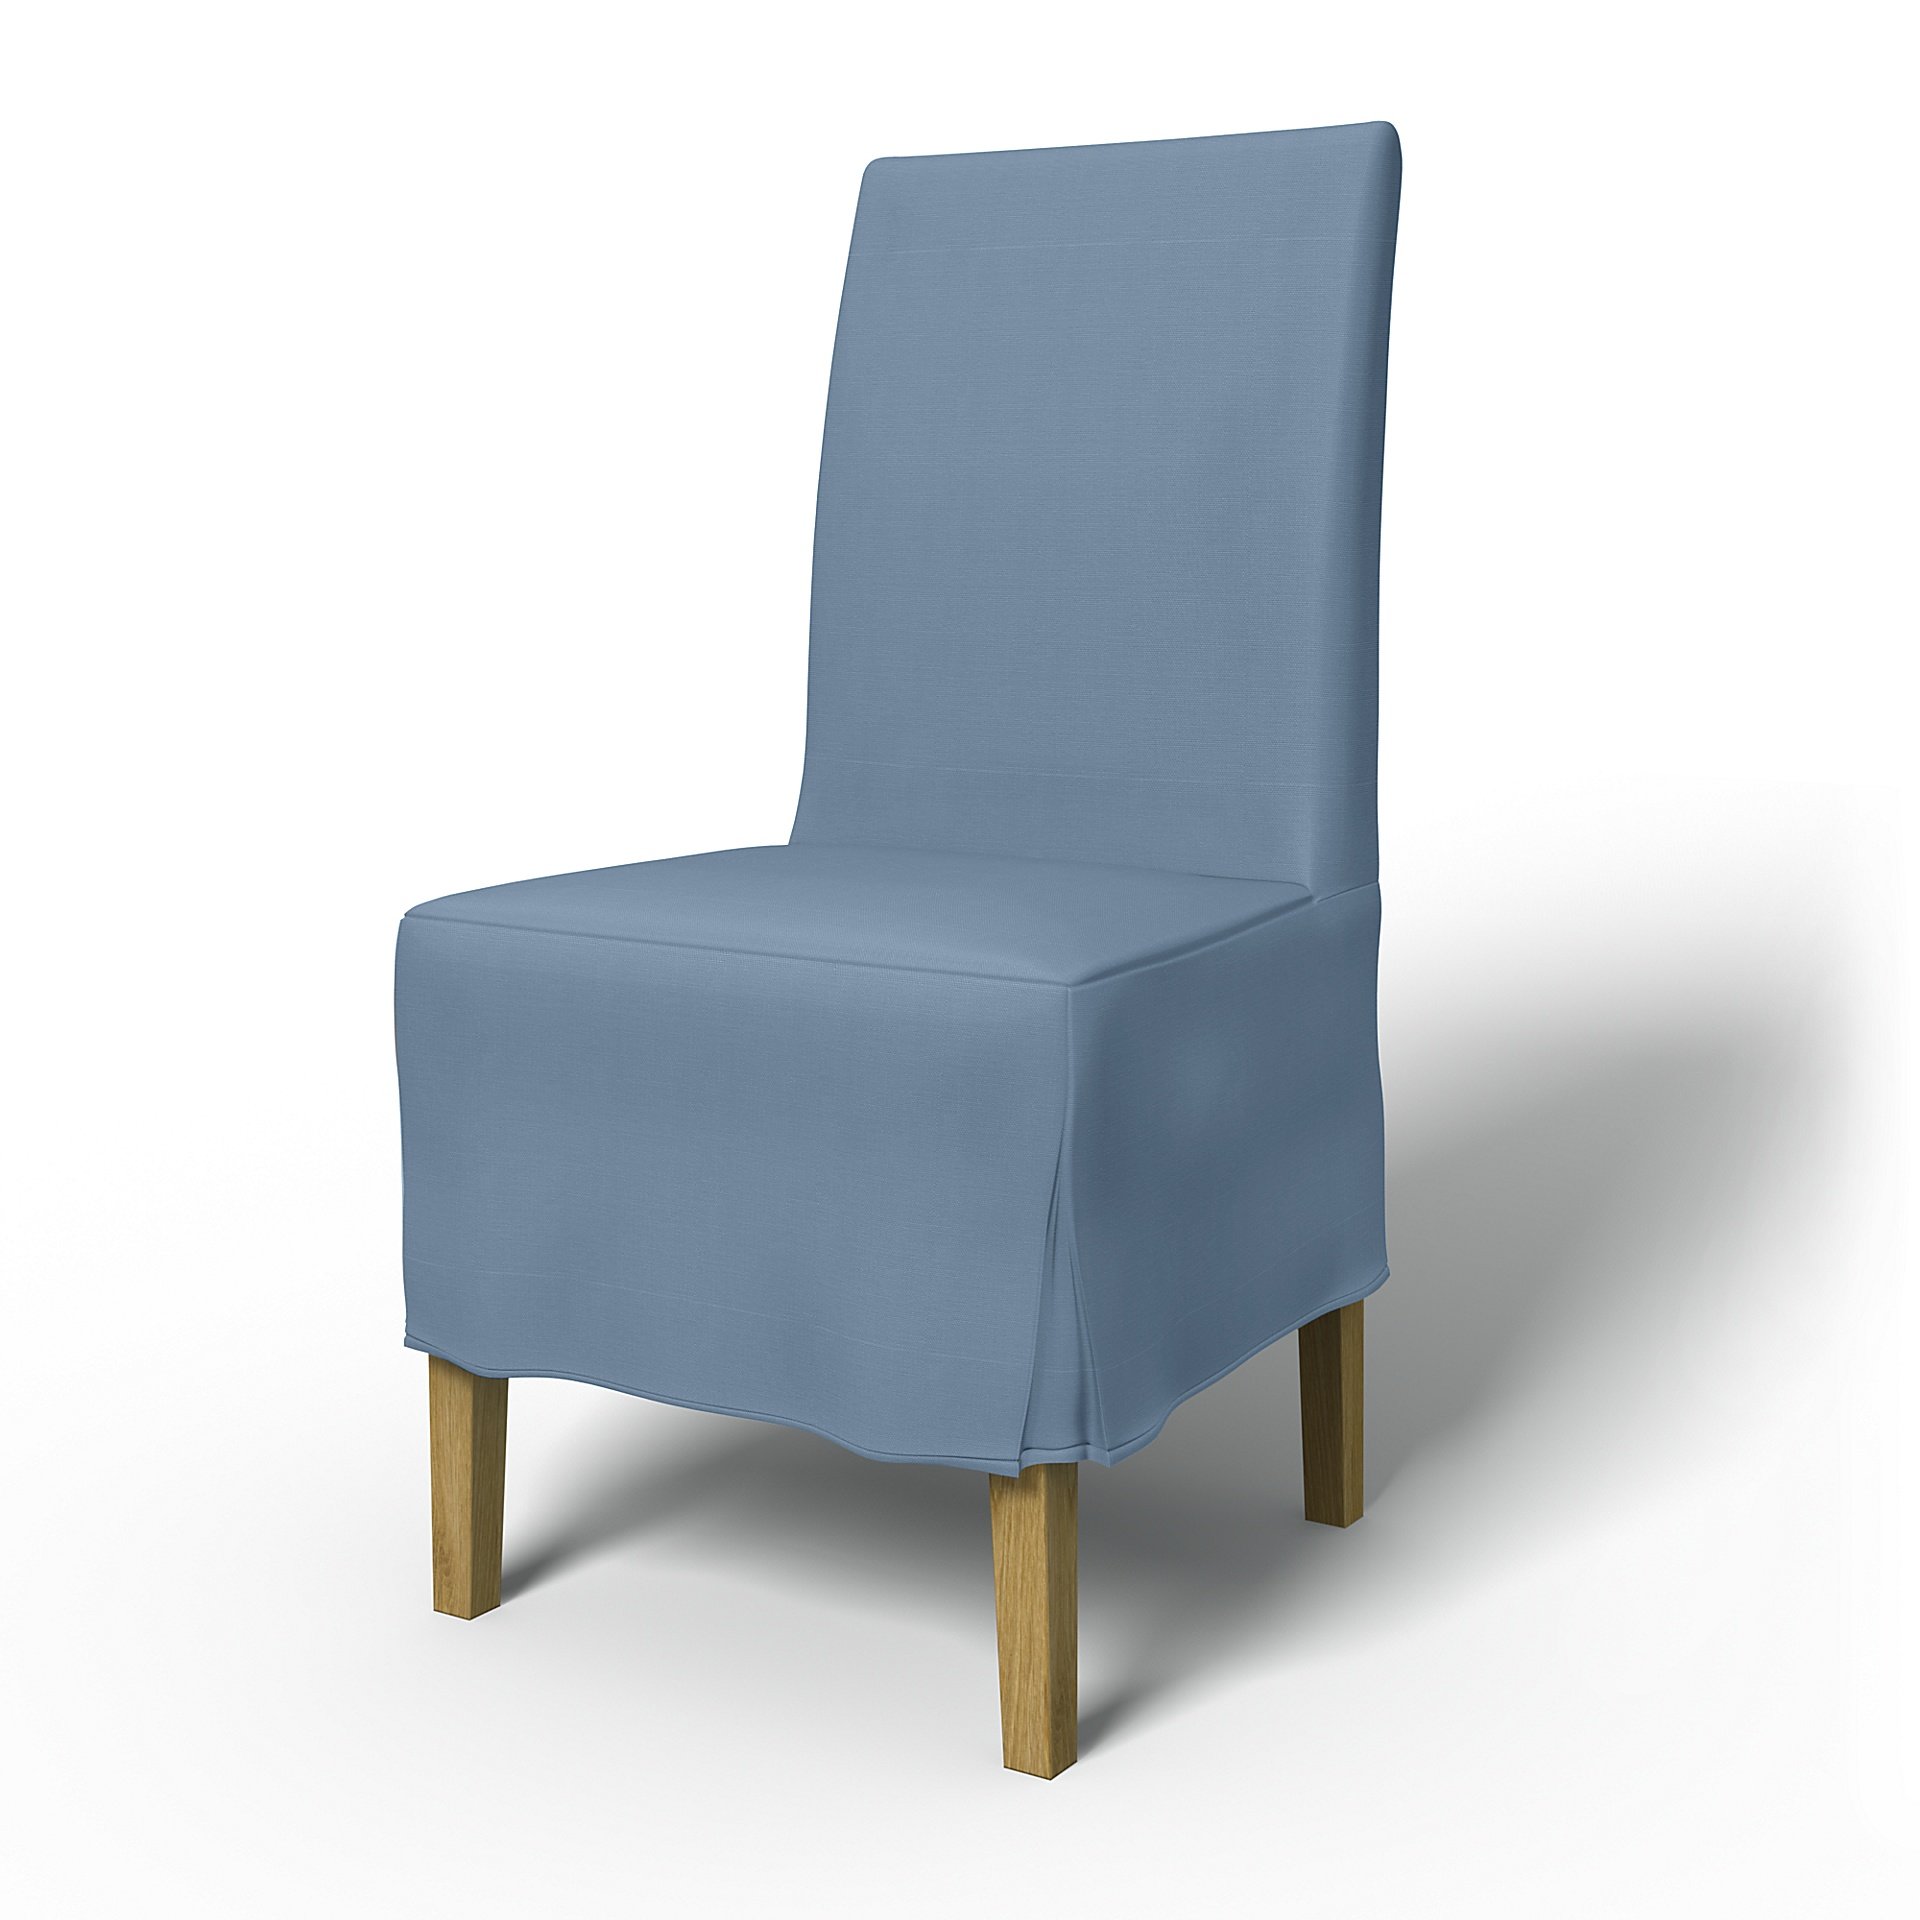 IKEA - Henriksdal Dining Chair Cover Medium skirt with Box Pleat (Standard model), Dusty Blue, Cotto